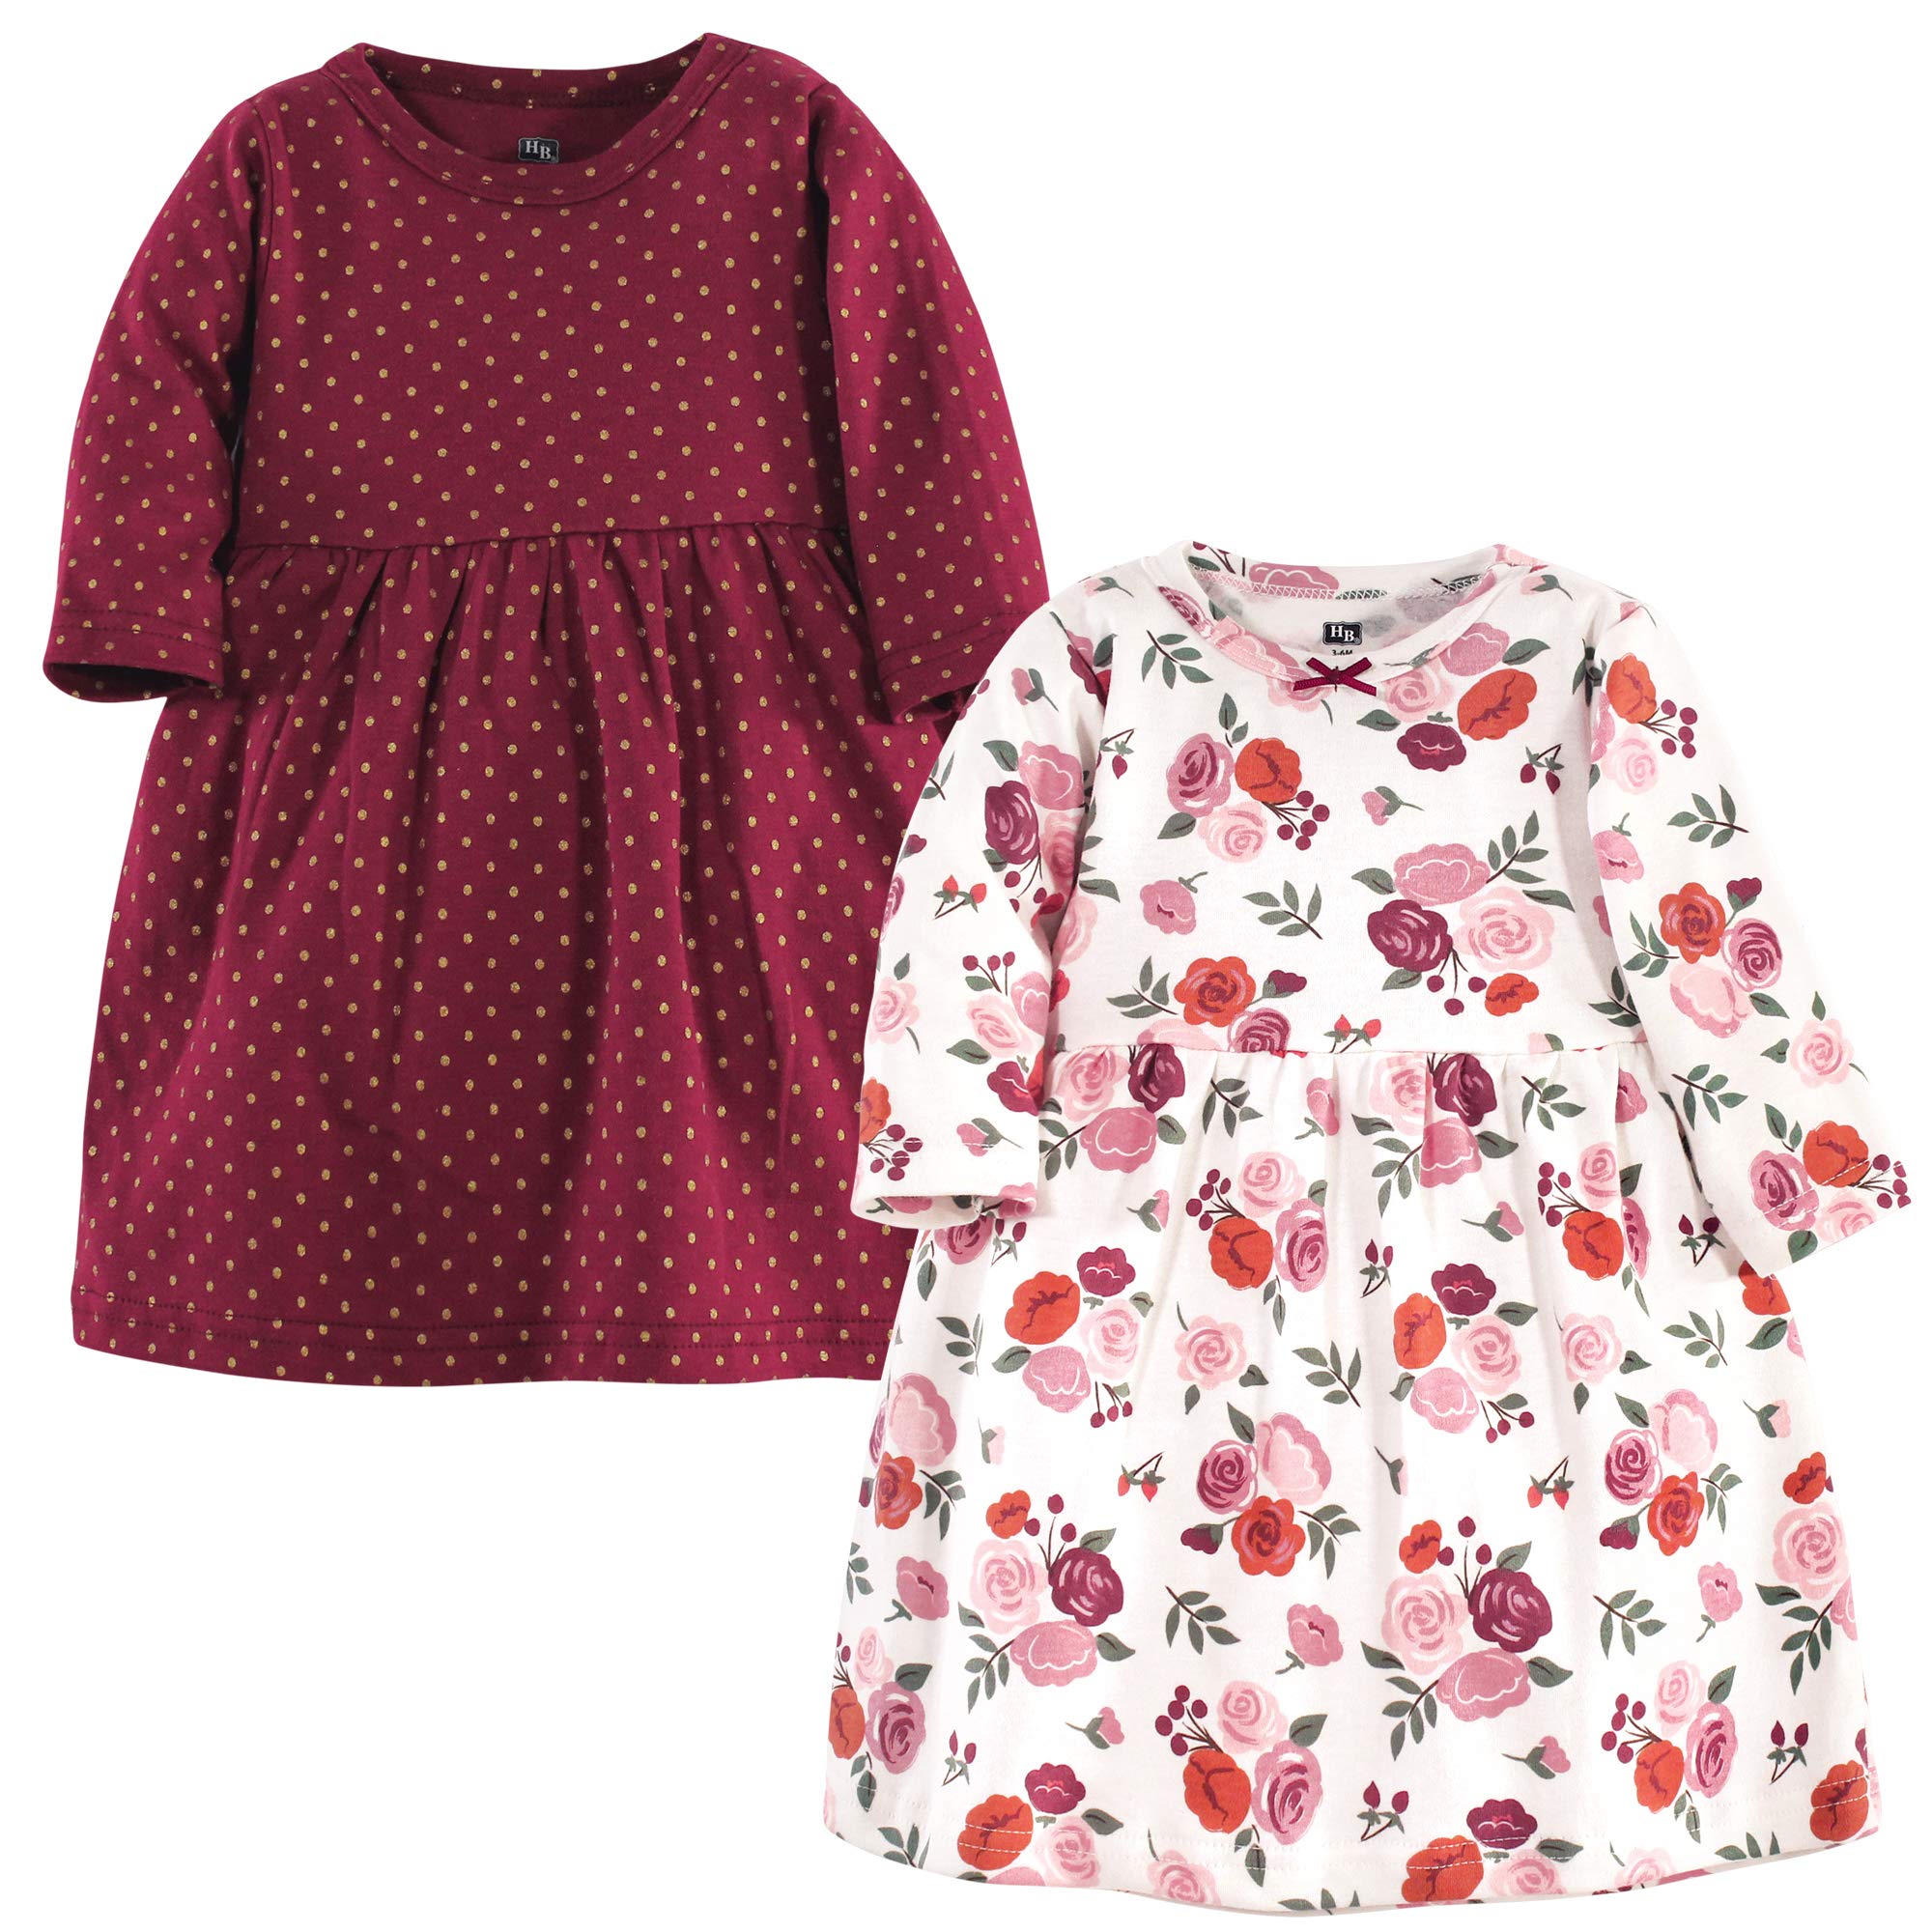 Hudson Baby Infant And Toddler Girl Cotton Dresses Fall Floral, 12-18 Months